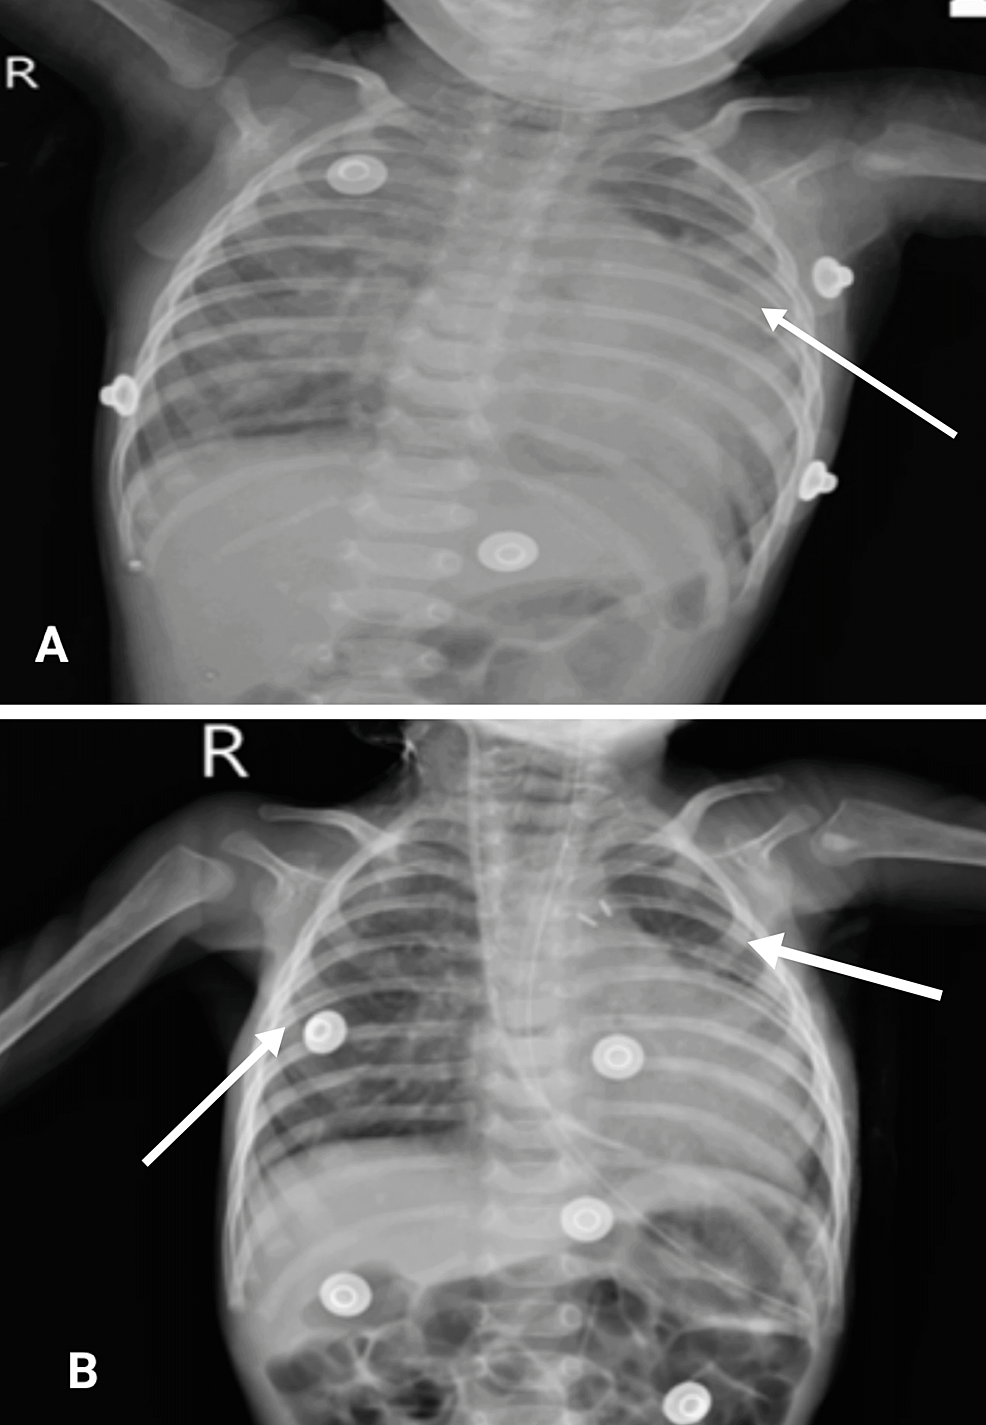 -Chest-Radiograph